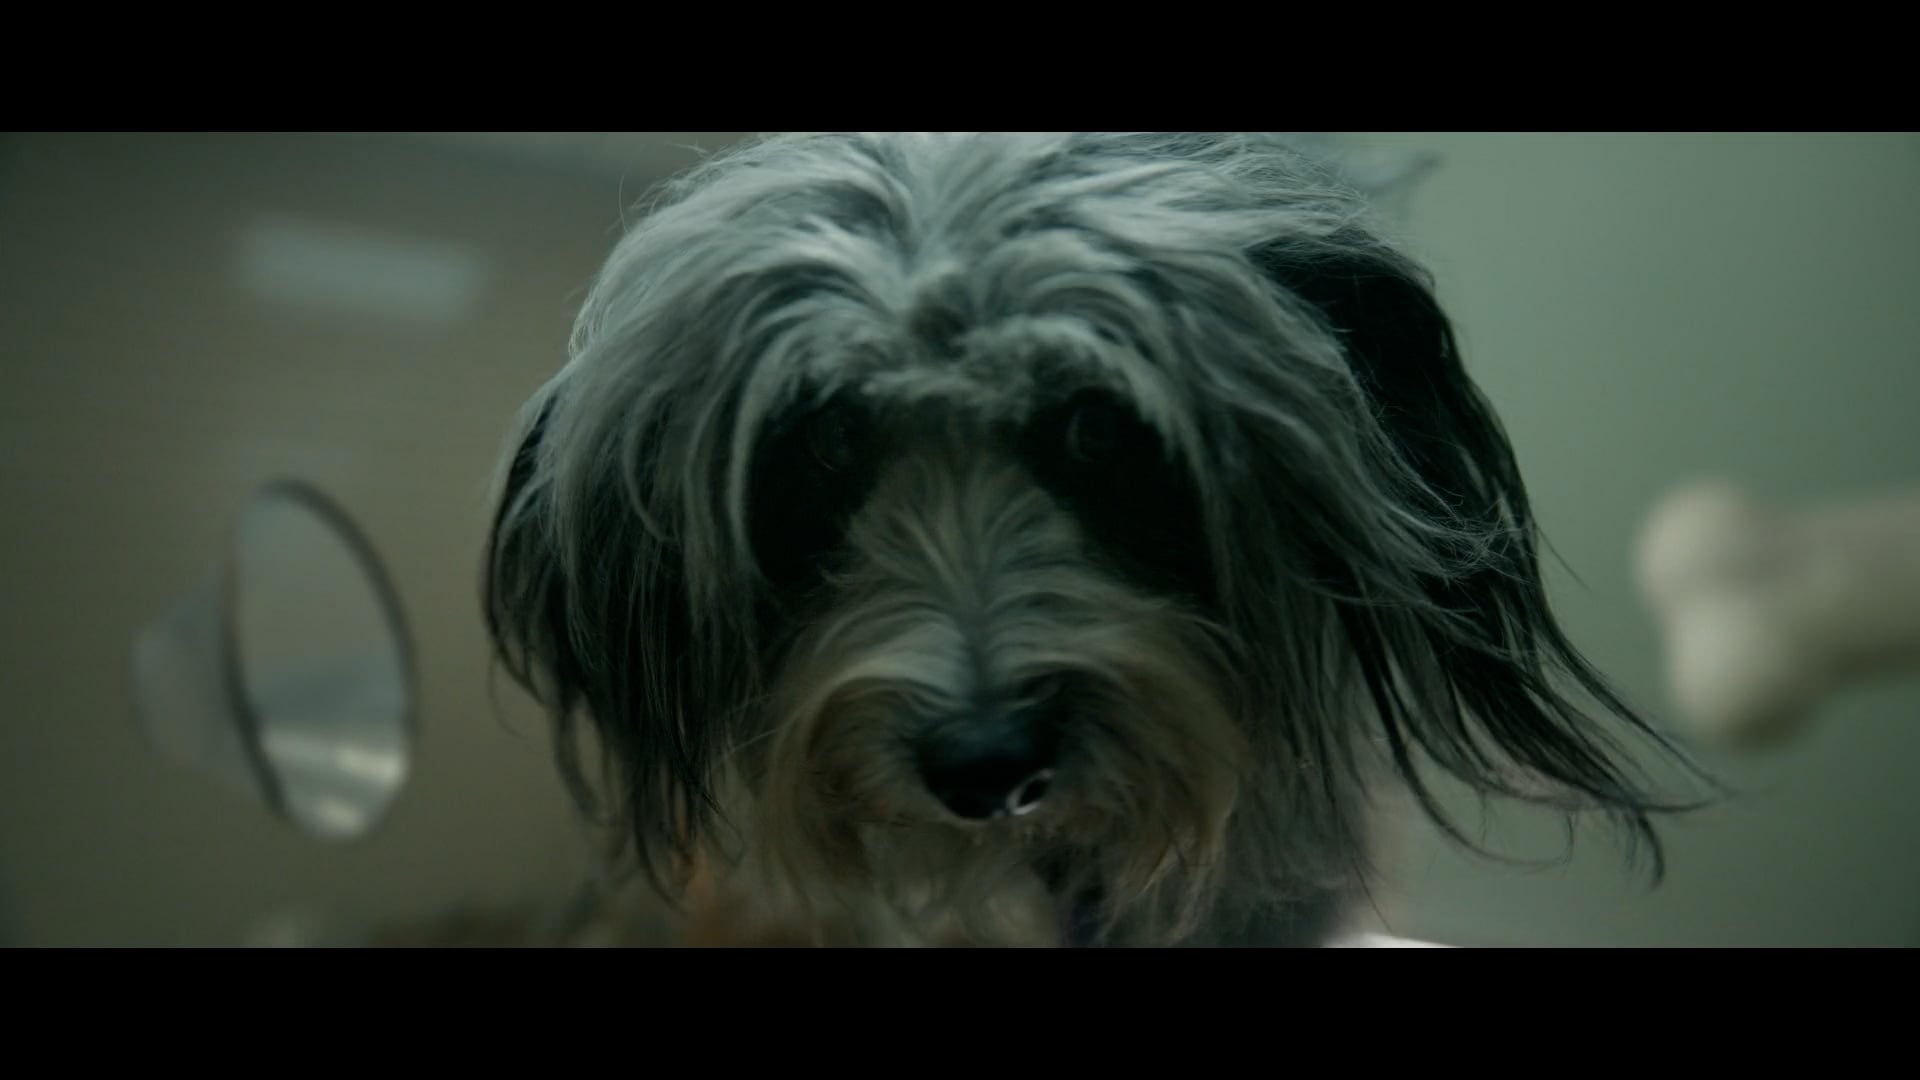 Starling Bank 'Dog Groomer' directed by Cloe Bailey and produced for Caviar